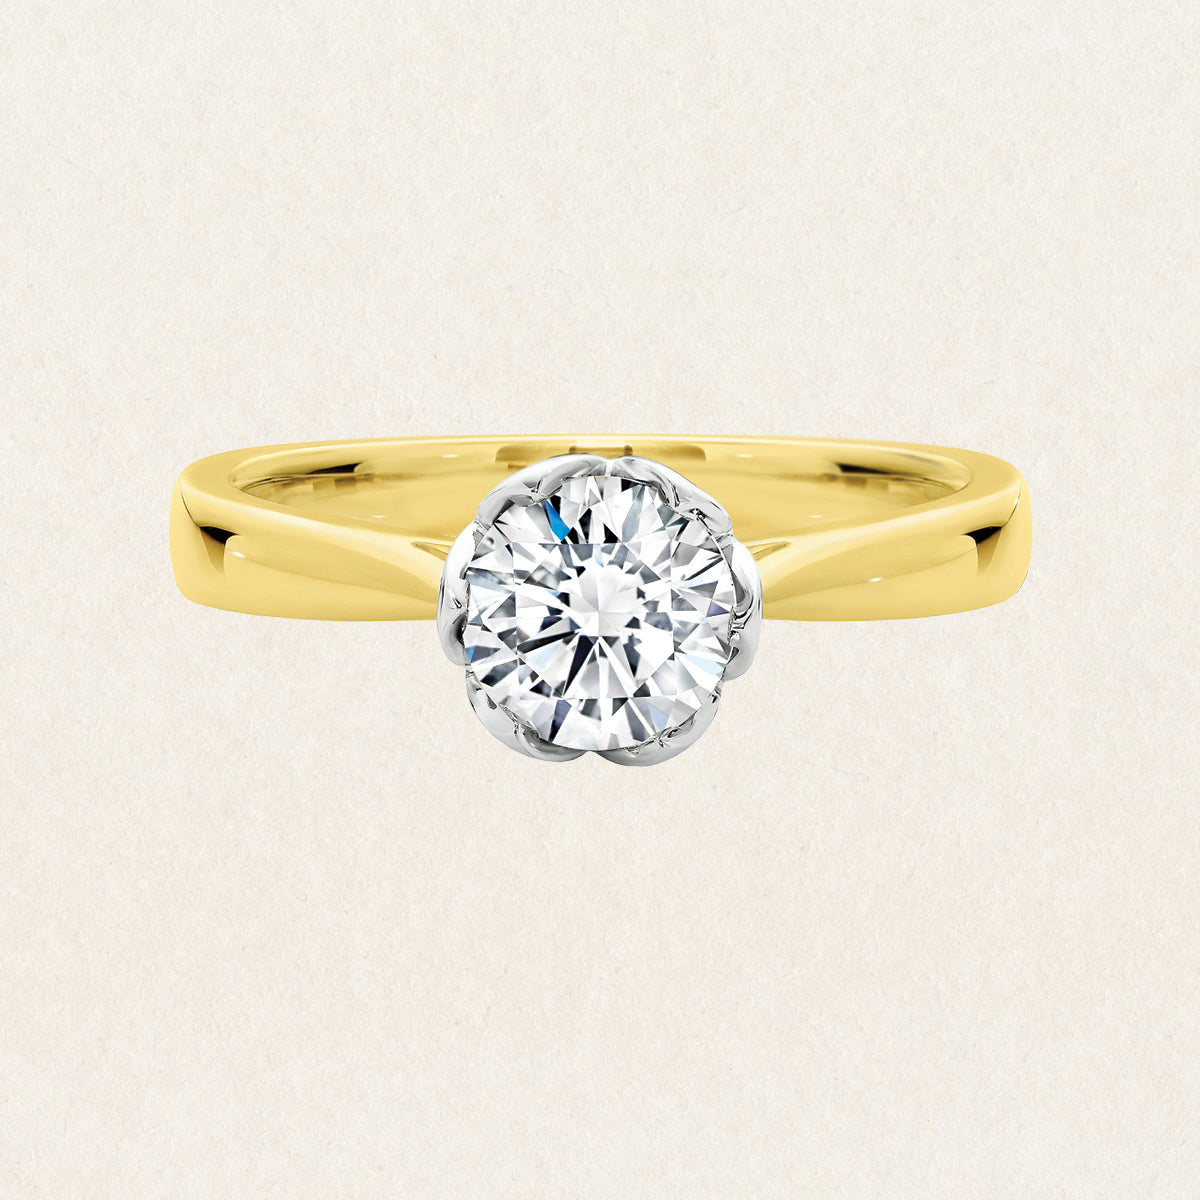 Brilliant round cut 0.73ct lab grown diamond solitaire ring made with 18k yellow and white gold